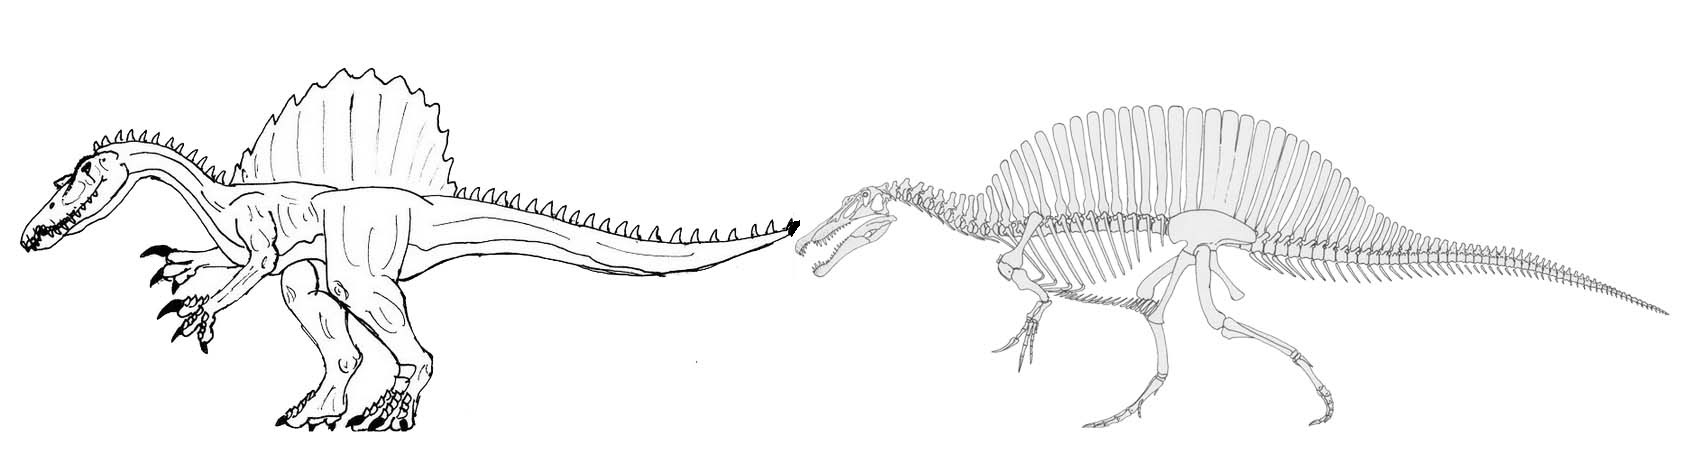 Spinosaurus skeleton coloring and drawing page